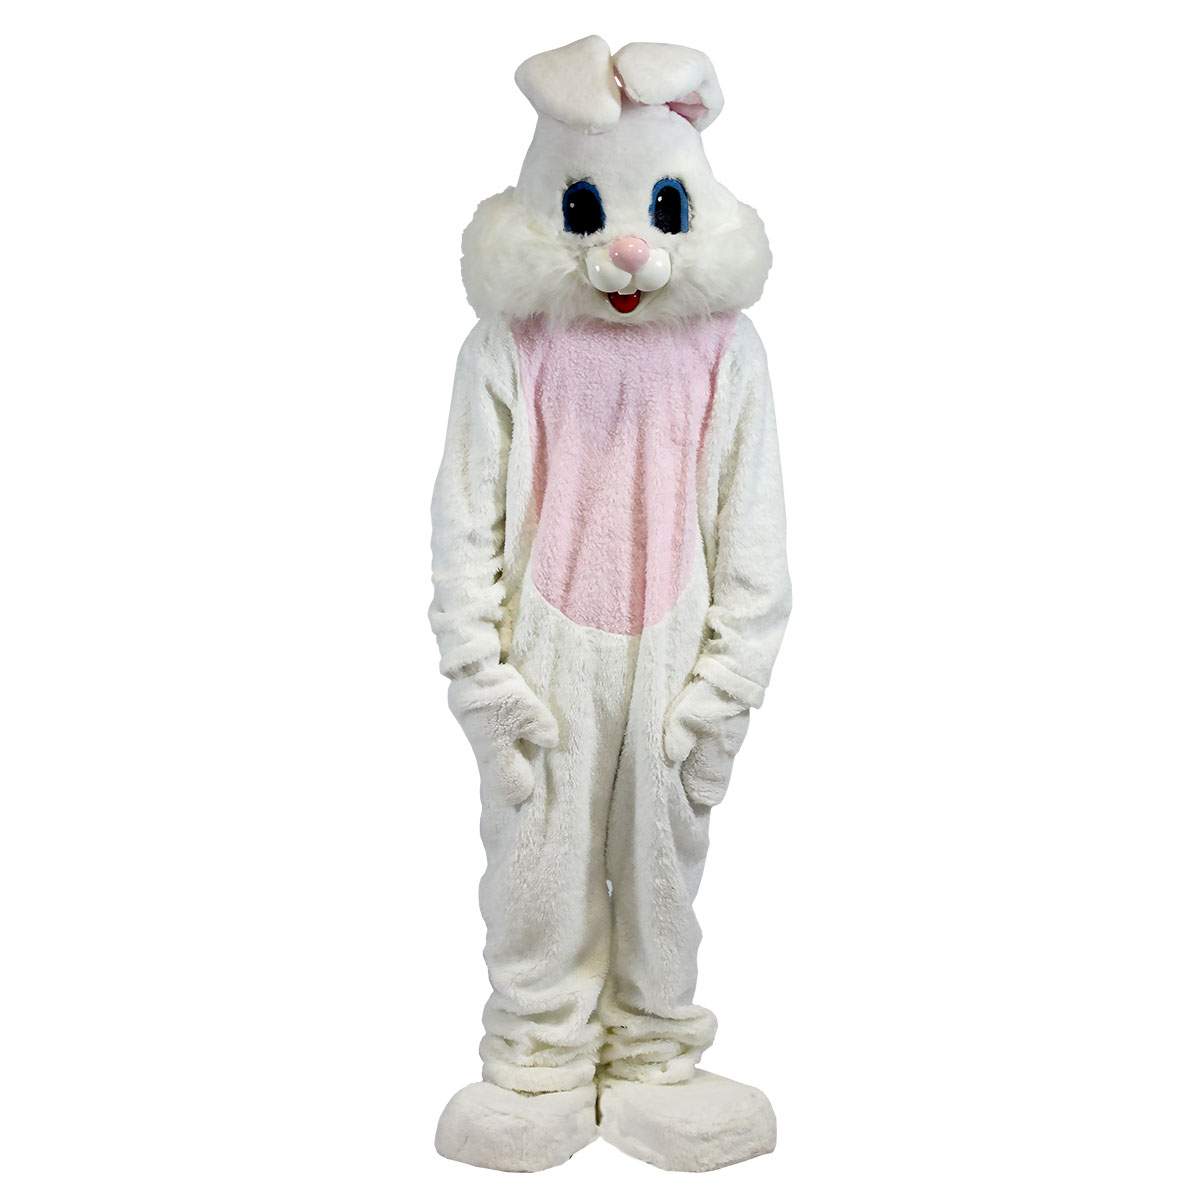 FOR SALE-Easter Bunny One Size Costume